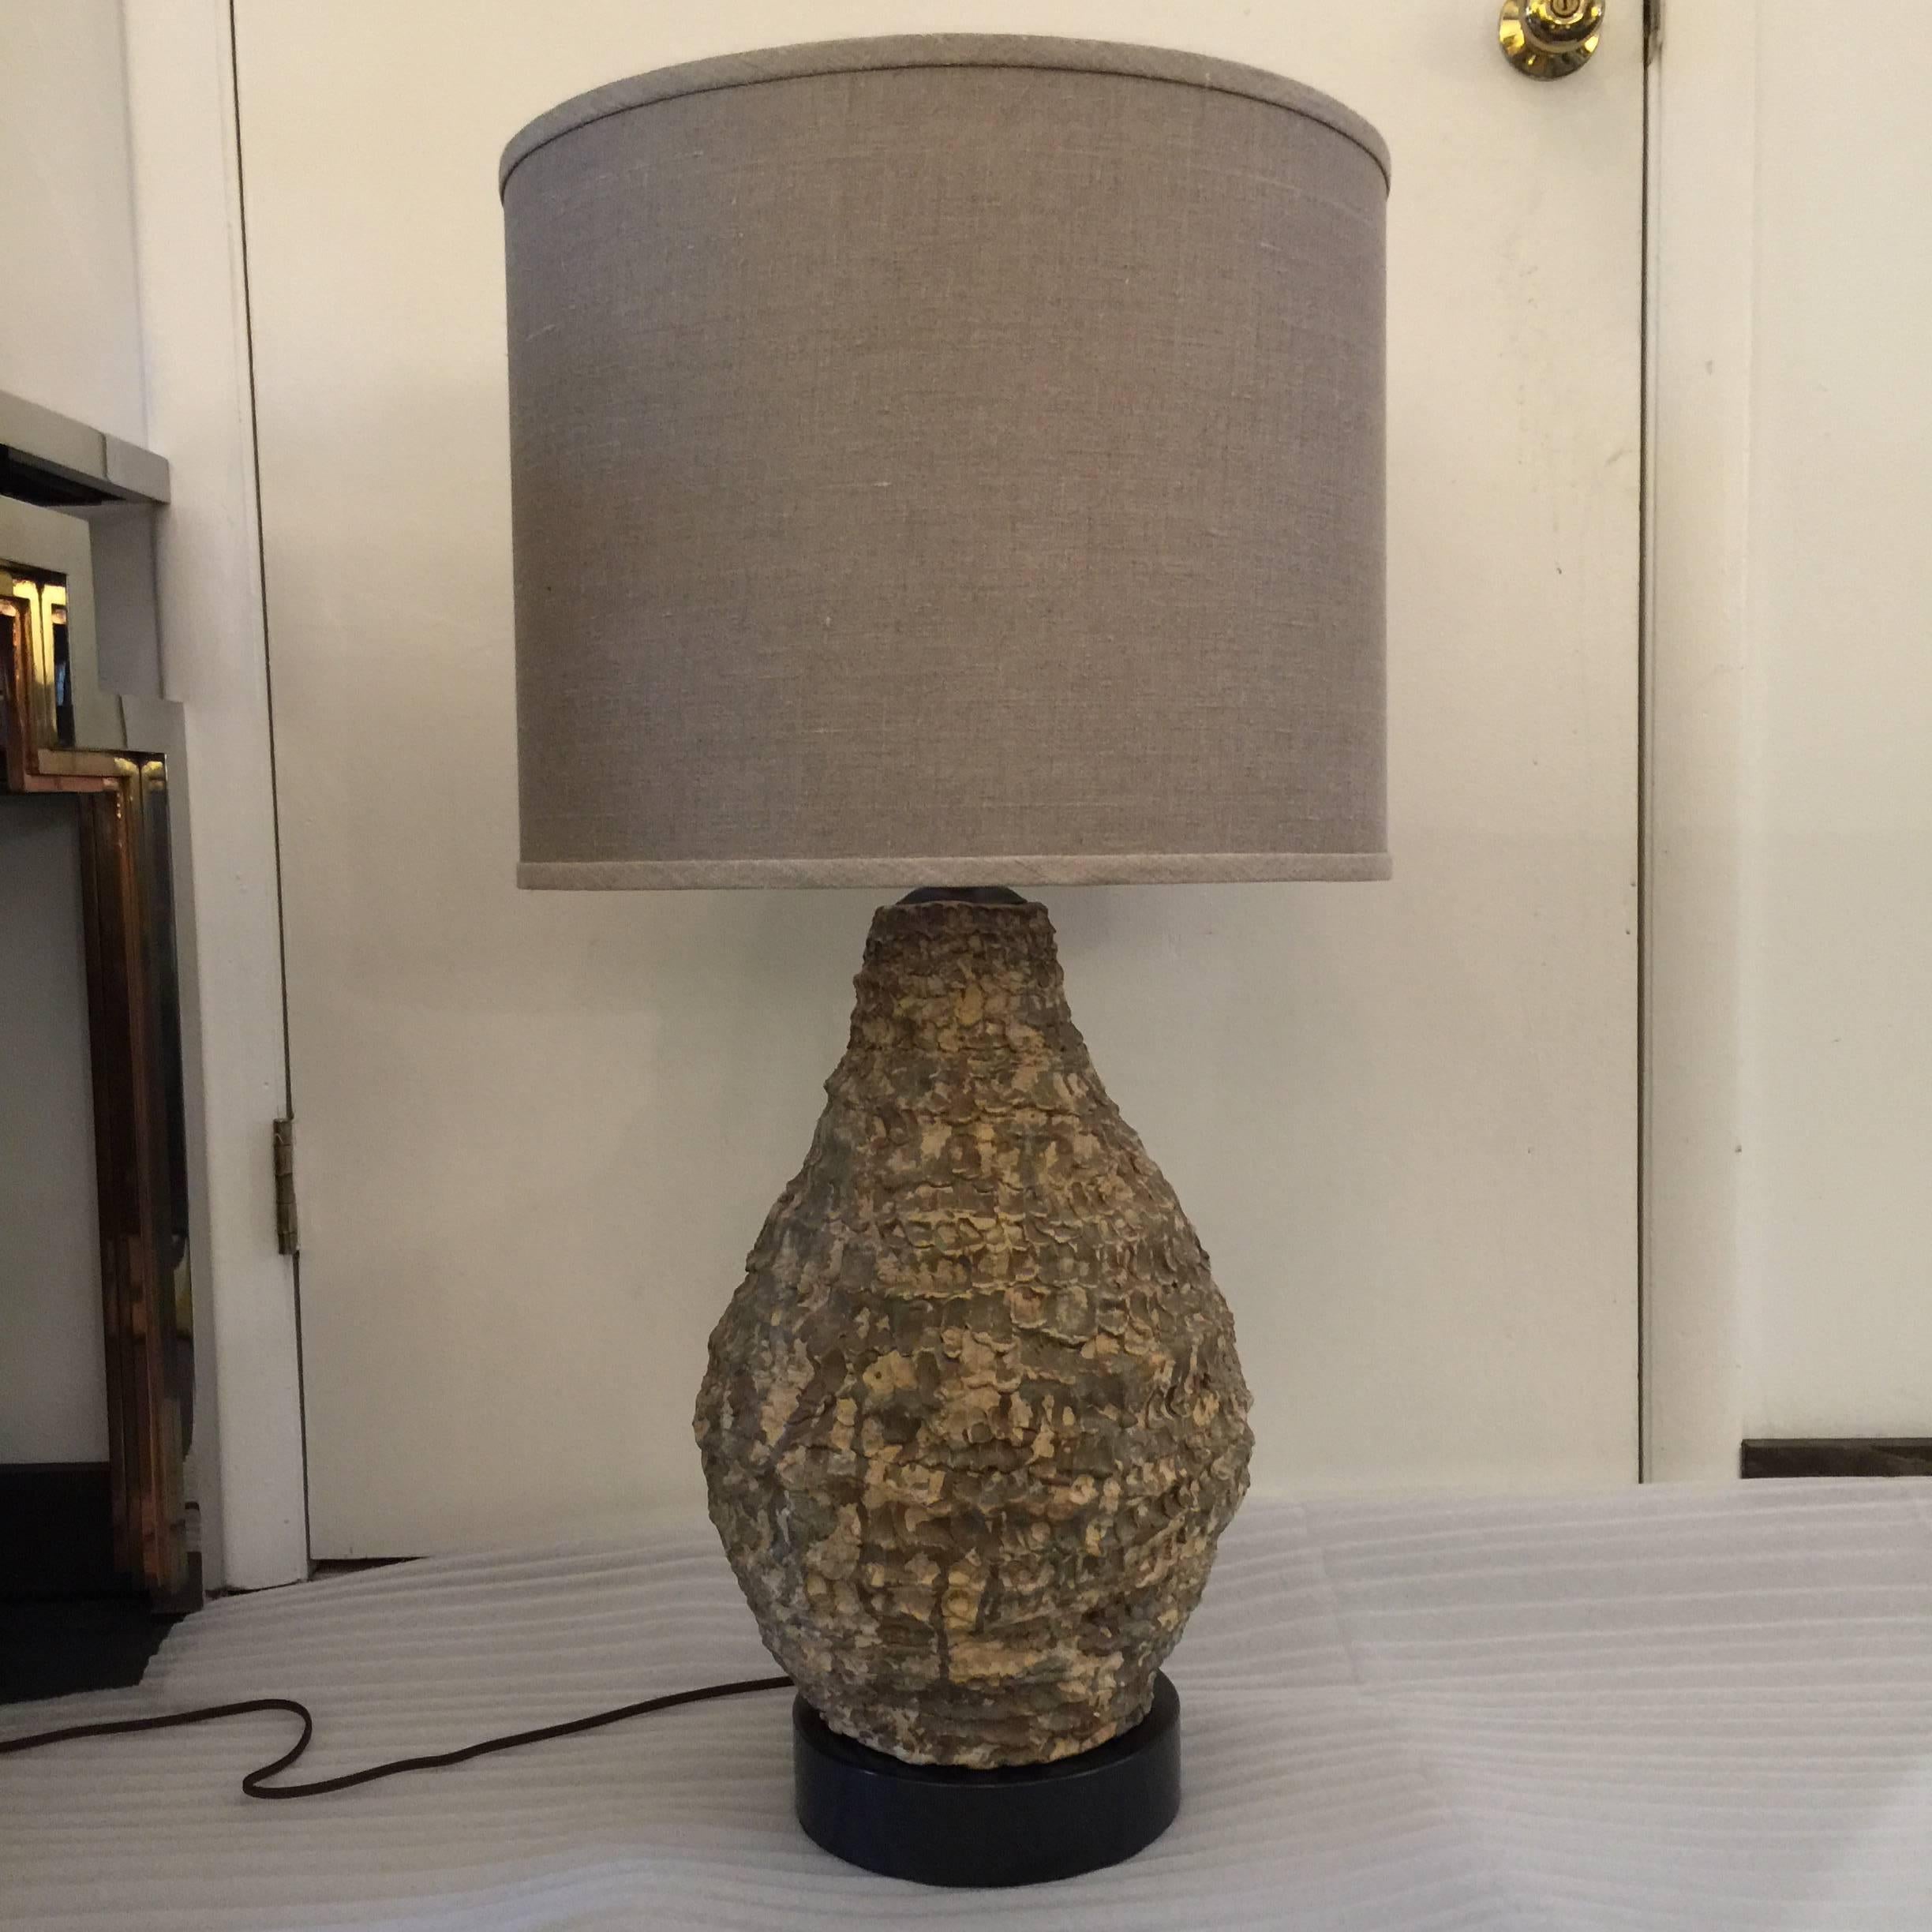 Newly rewired in brown silk cable and double socket cluster, finished in oil bronze base.

Note: shade not included.